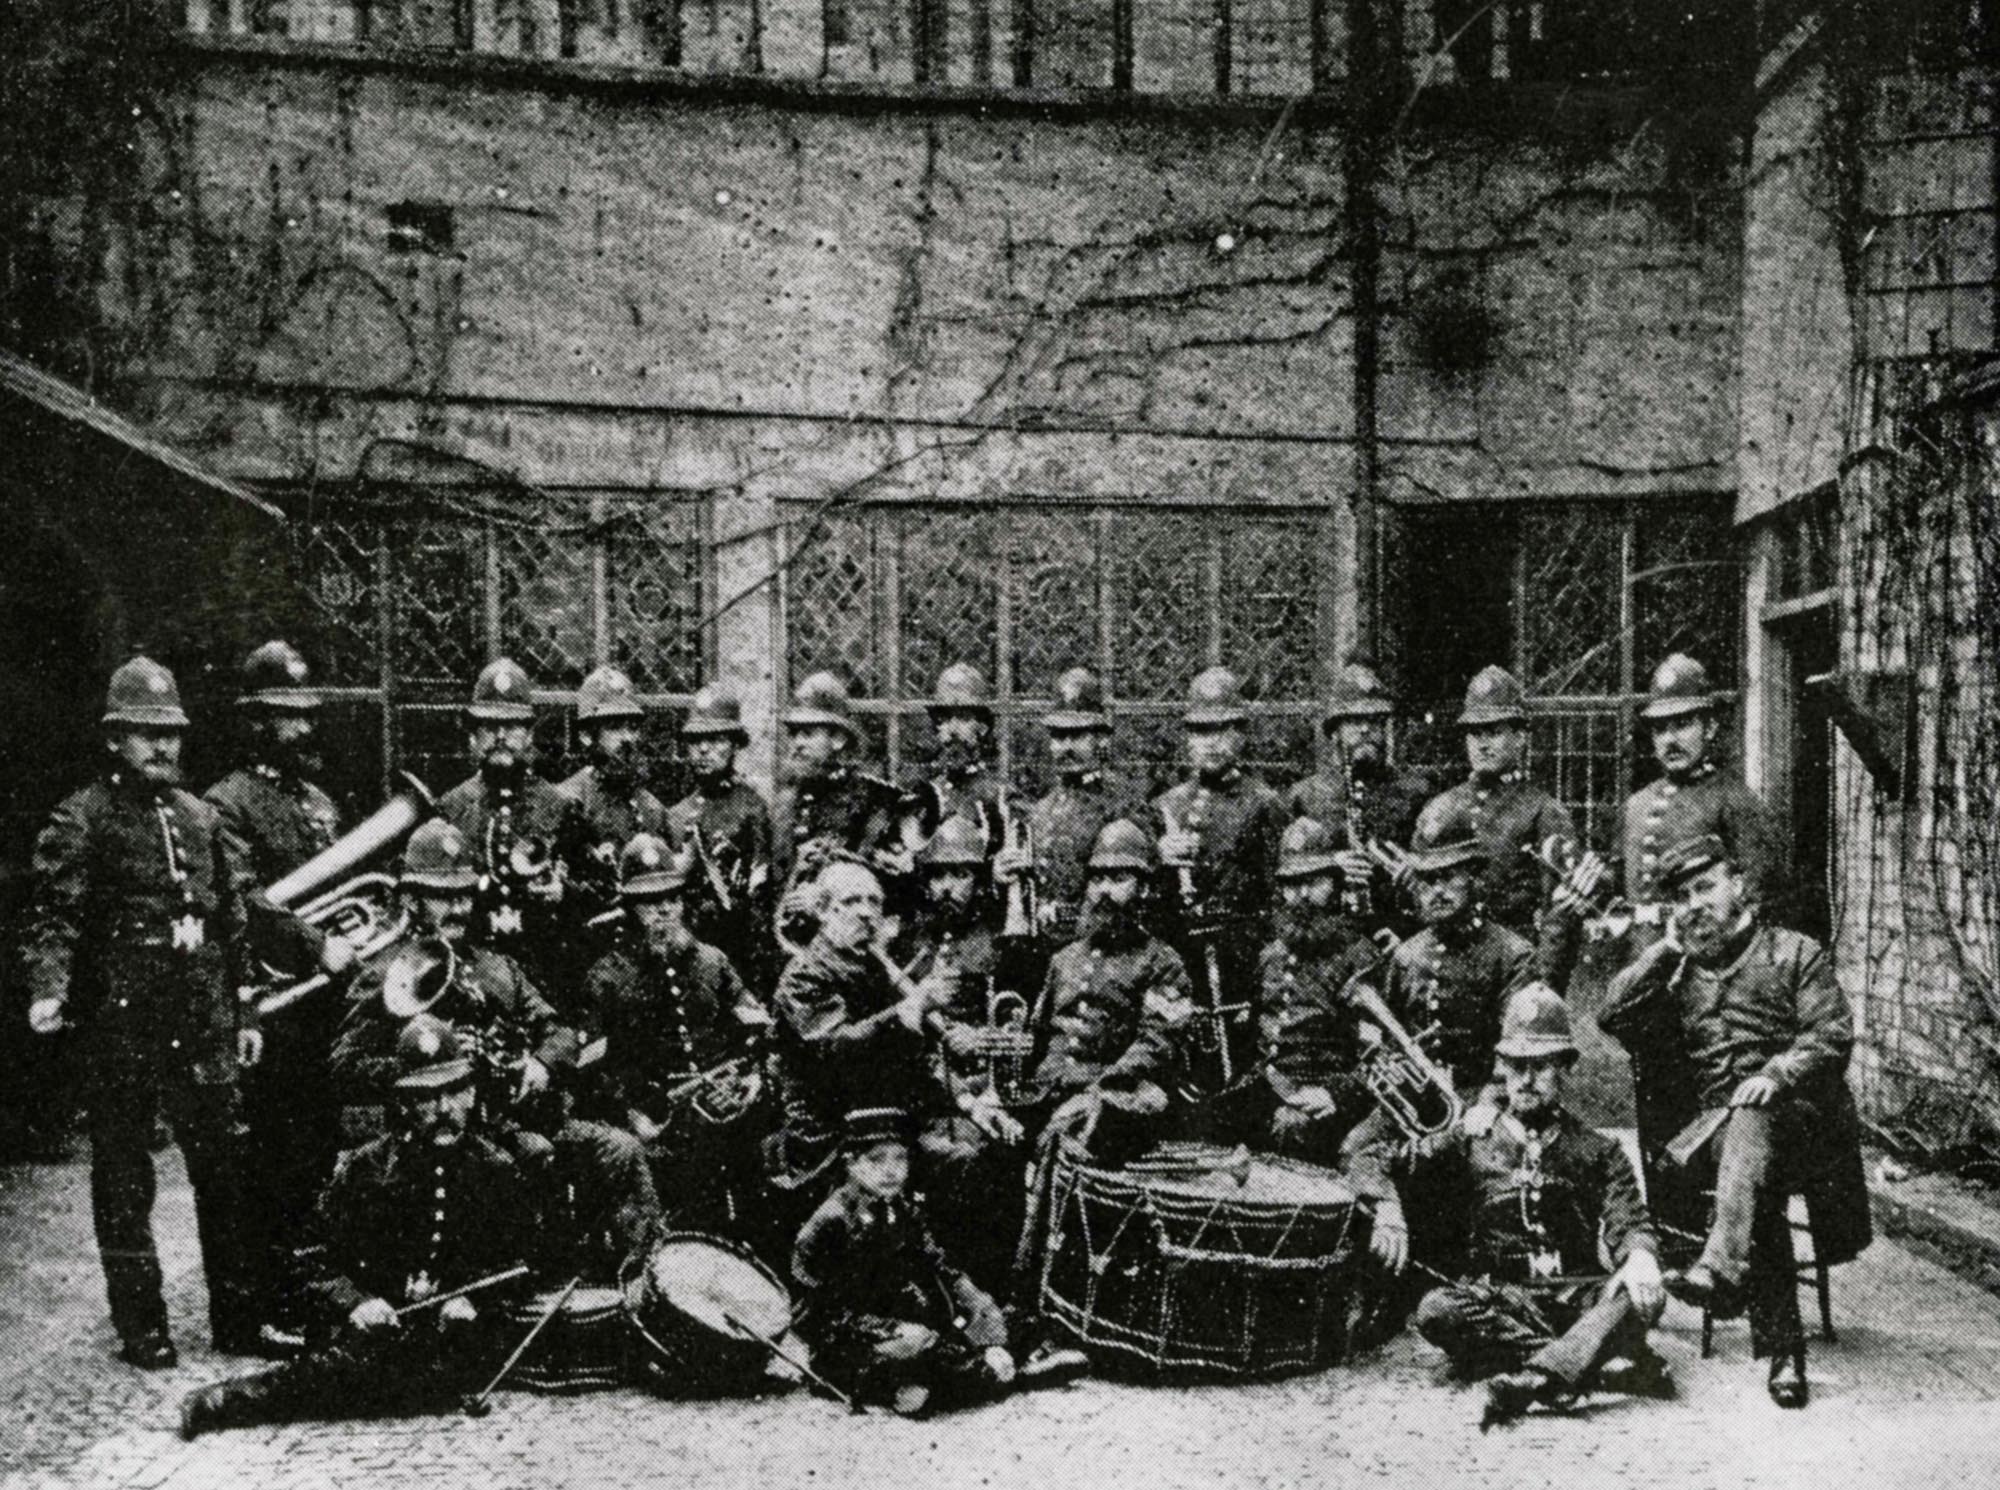 Leicester Borough Police Band, c.1865 in the courtyard of what is now Leicester Guildhall - 